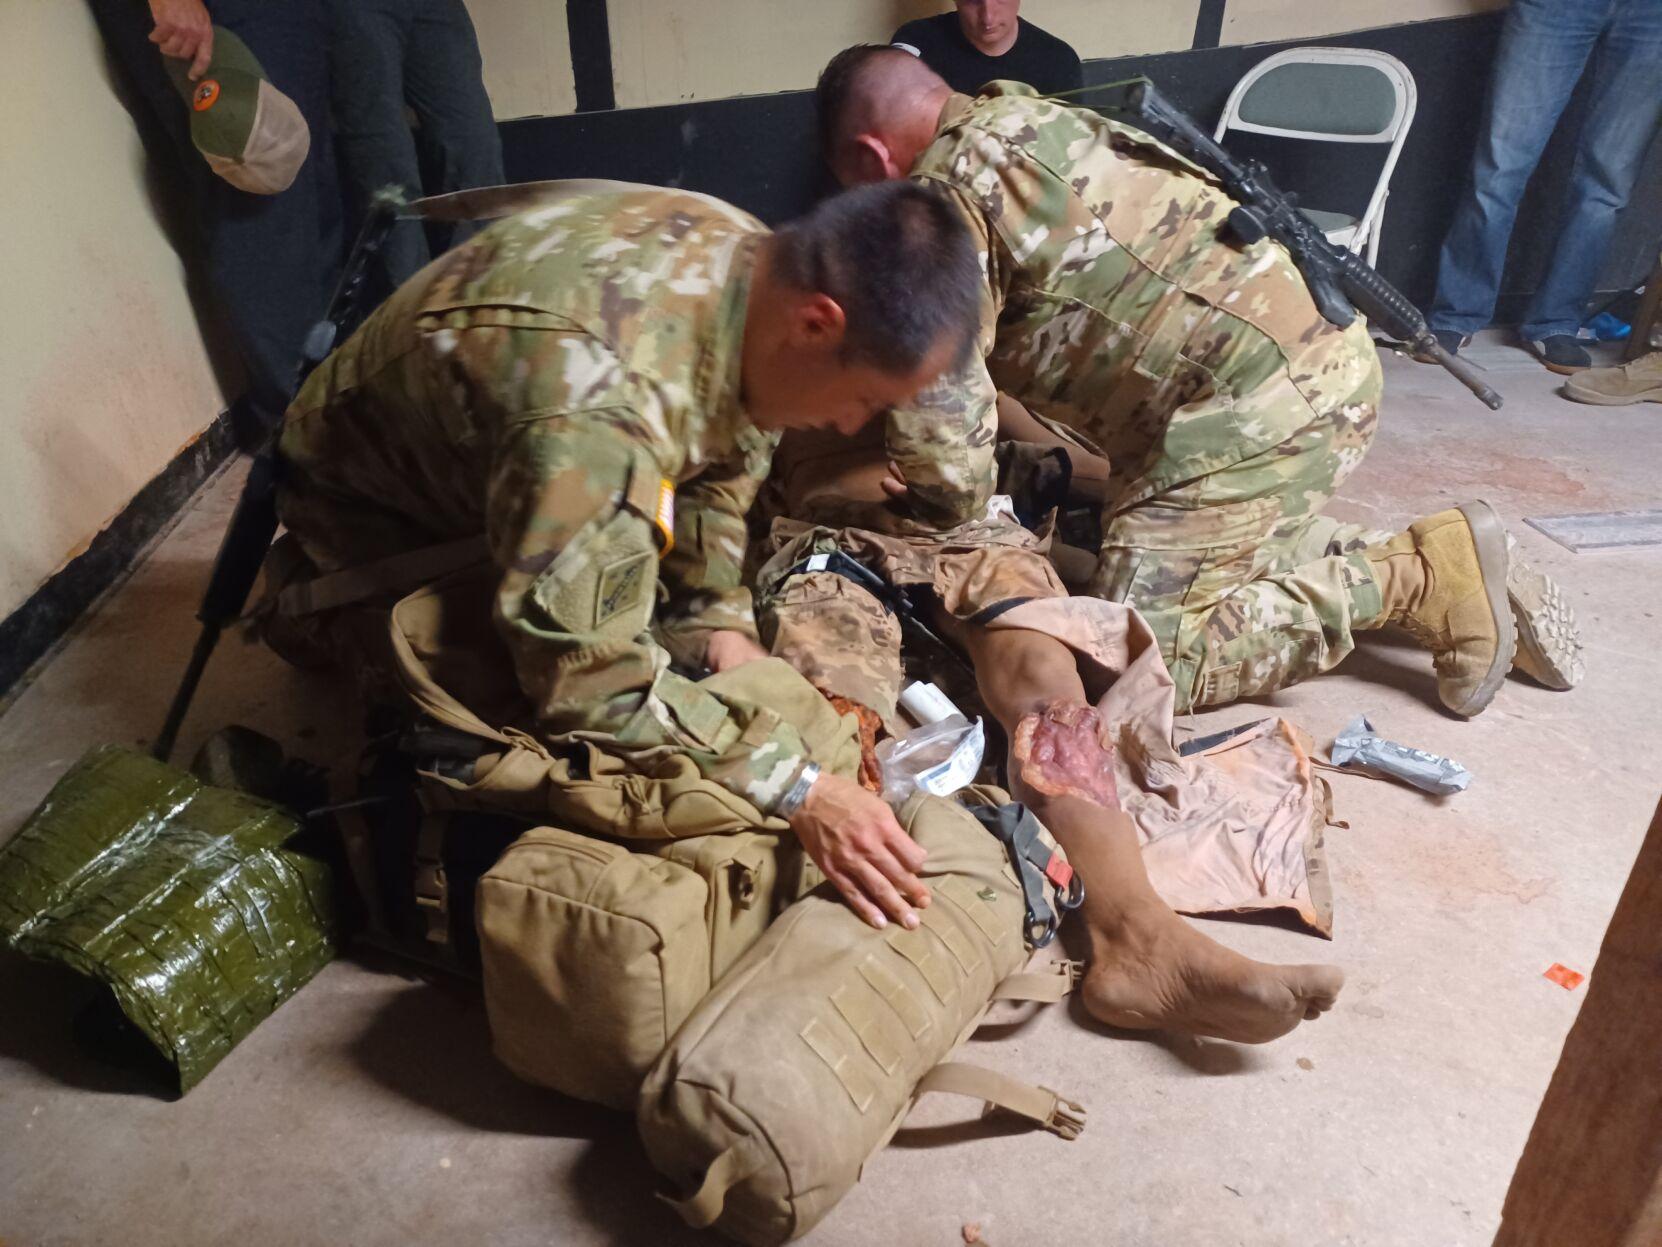 Staff Sgt. Todd Marchese, right, and Sgt. 1st Class Kurt Hogan, both flight medics with the Louisiana Army National Guard, simulate working on a medical dummy during a Joint Emergency Medicine Exercise hosted by Carl R. Darnall Army Medical Center on Fort Hood on June 7. The training is part of a week-long exercise for Tri-Service Military Residency Program students and medical personnel from Army, Navy and Air Force medical teams, including active duty, National Guard and Reserves to familiarize the different medical professions with what each job does in combat scenarios.